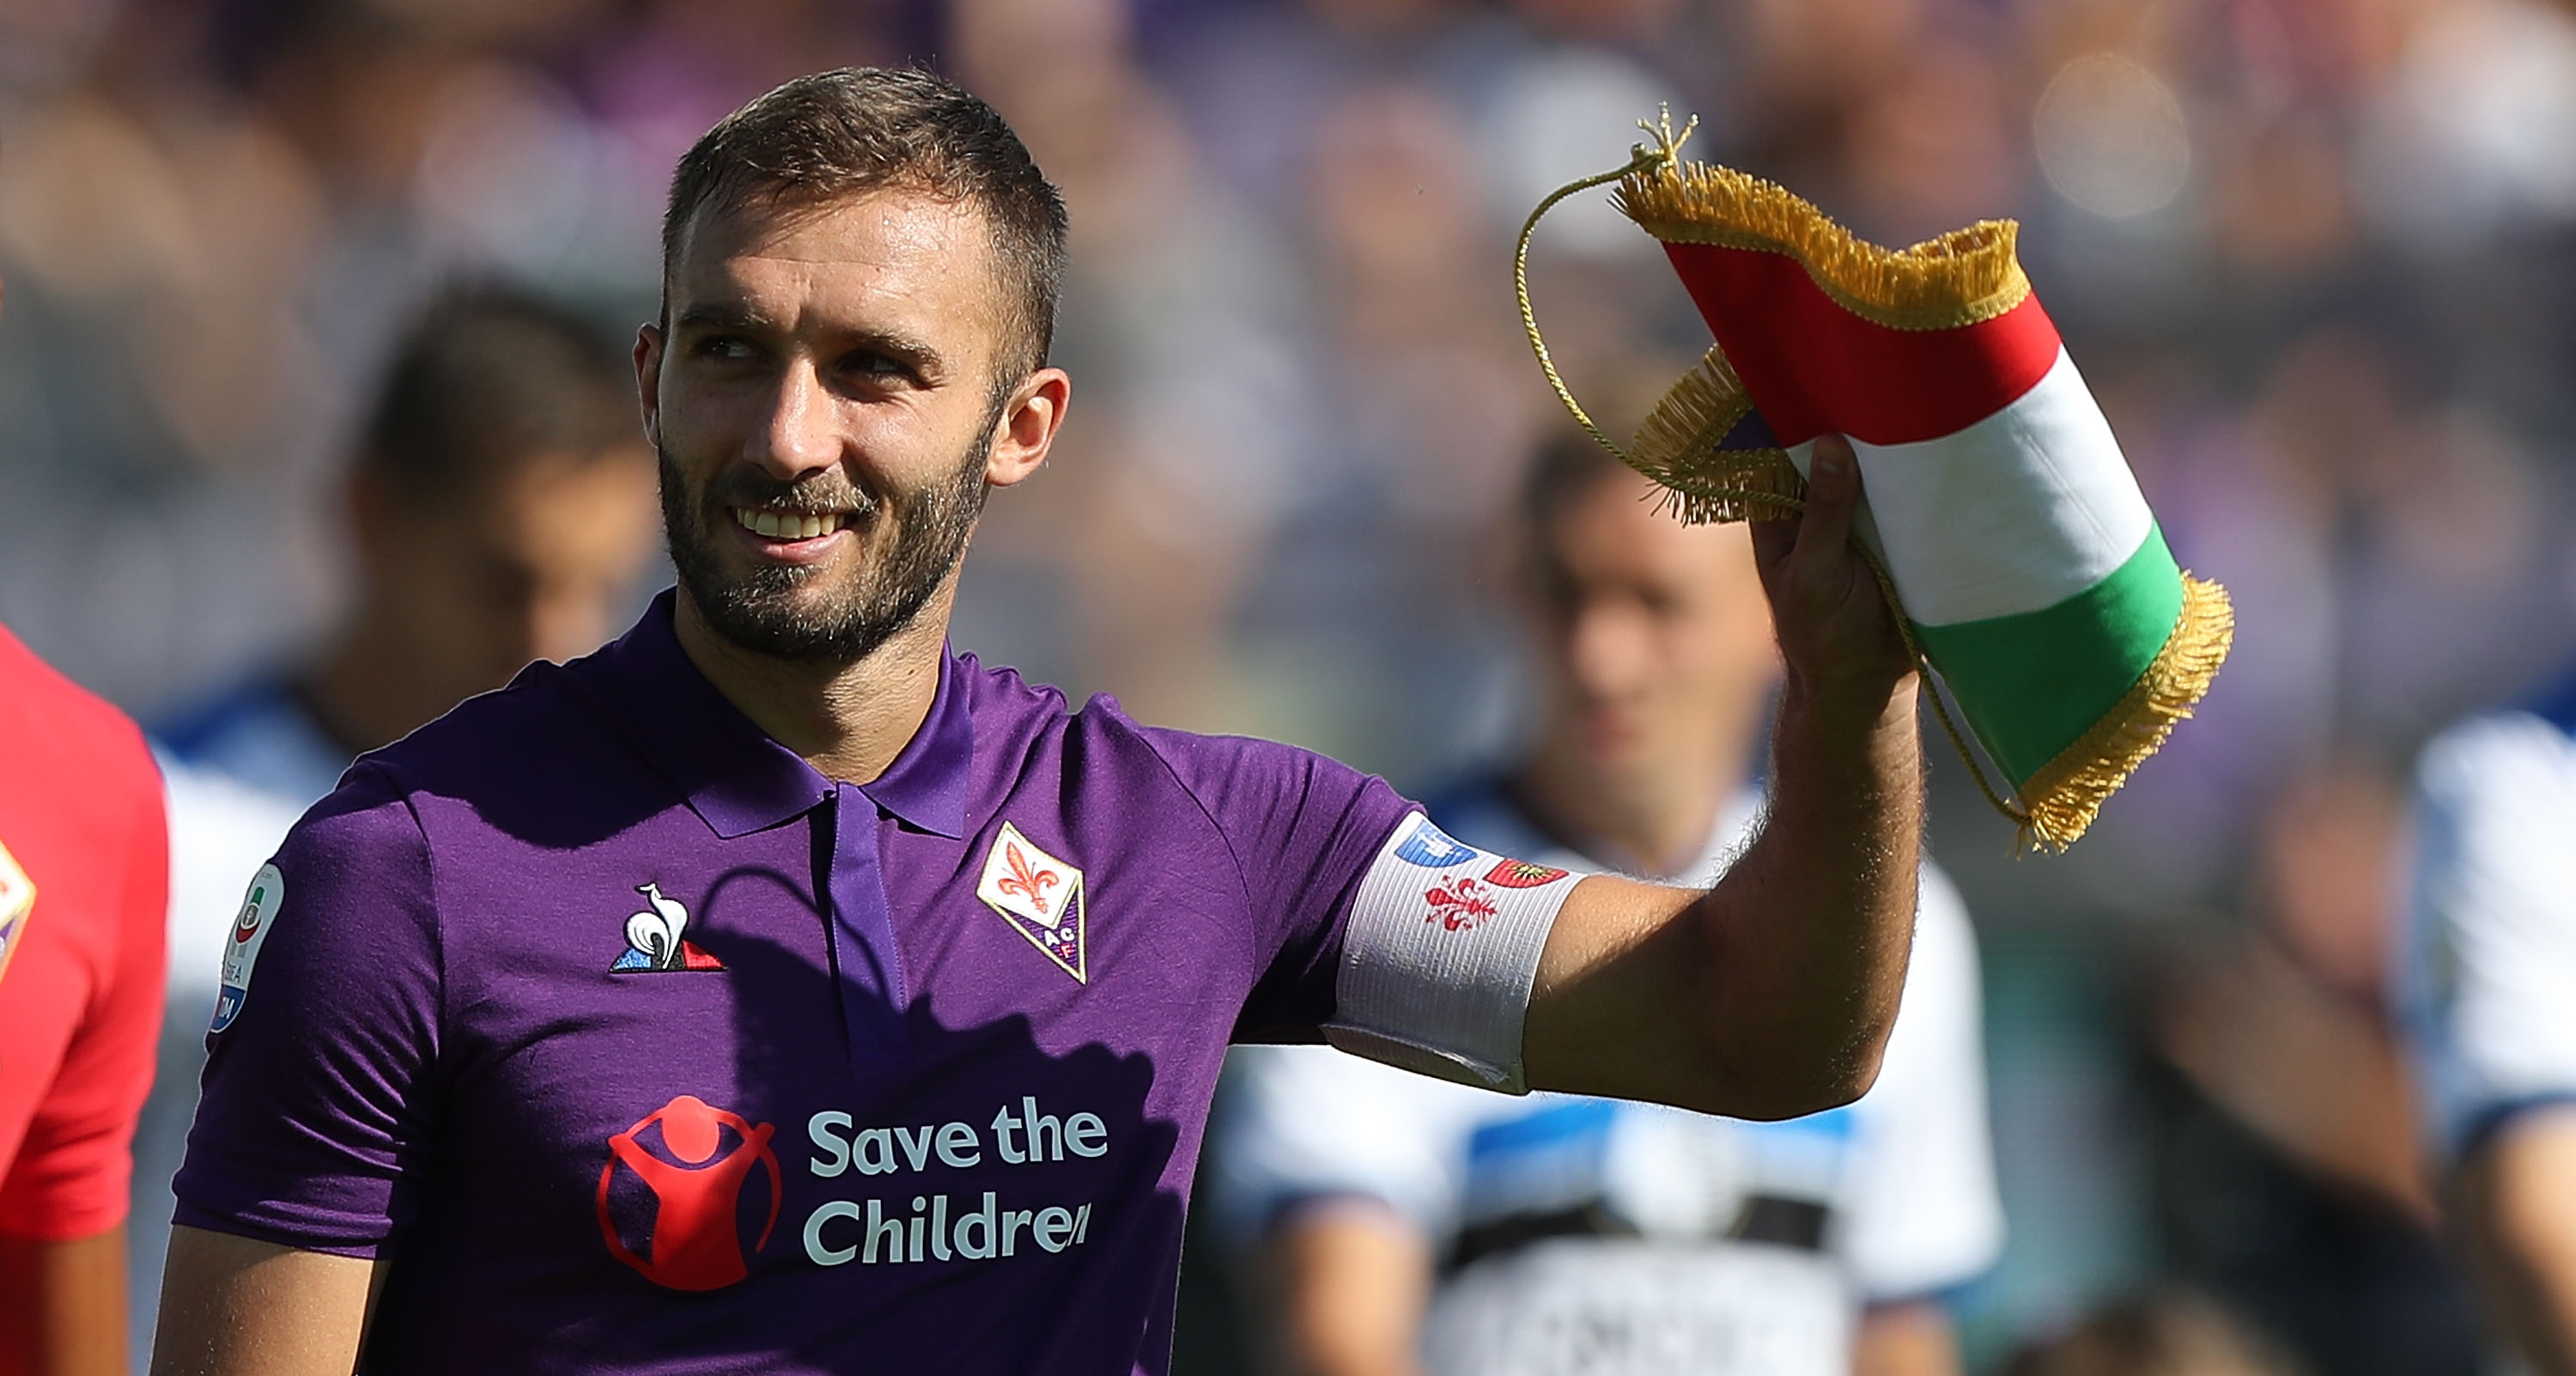 FLORENCE, ITALY - SEPTEMBER 30: German Pezzella of ACF Fiorentina looks on during the Serie A match between ACF Fiorentina and Atalanta BC at Stadio Artemio Franchi on September 30, 2018 in Florence, Italy.  (Photo by Gabriele Maltinti/Getty Images)